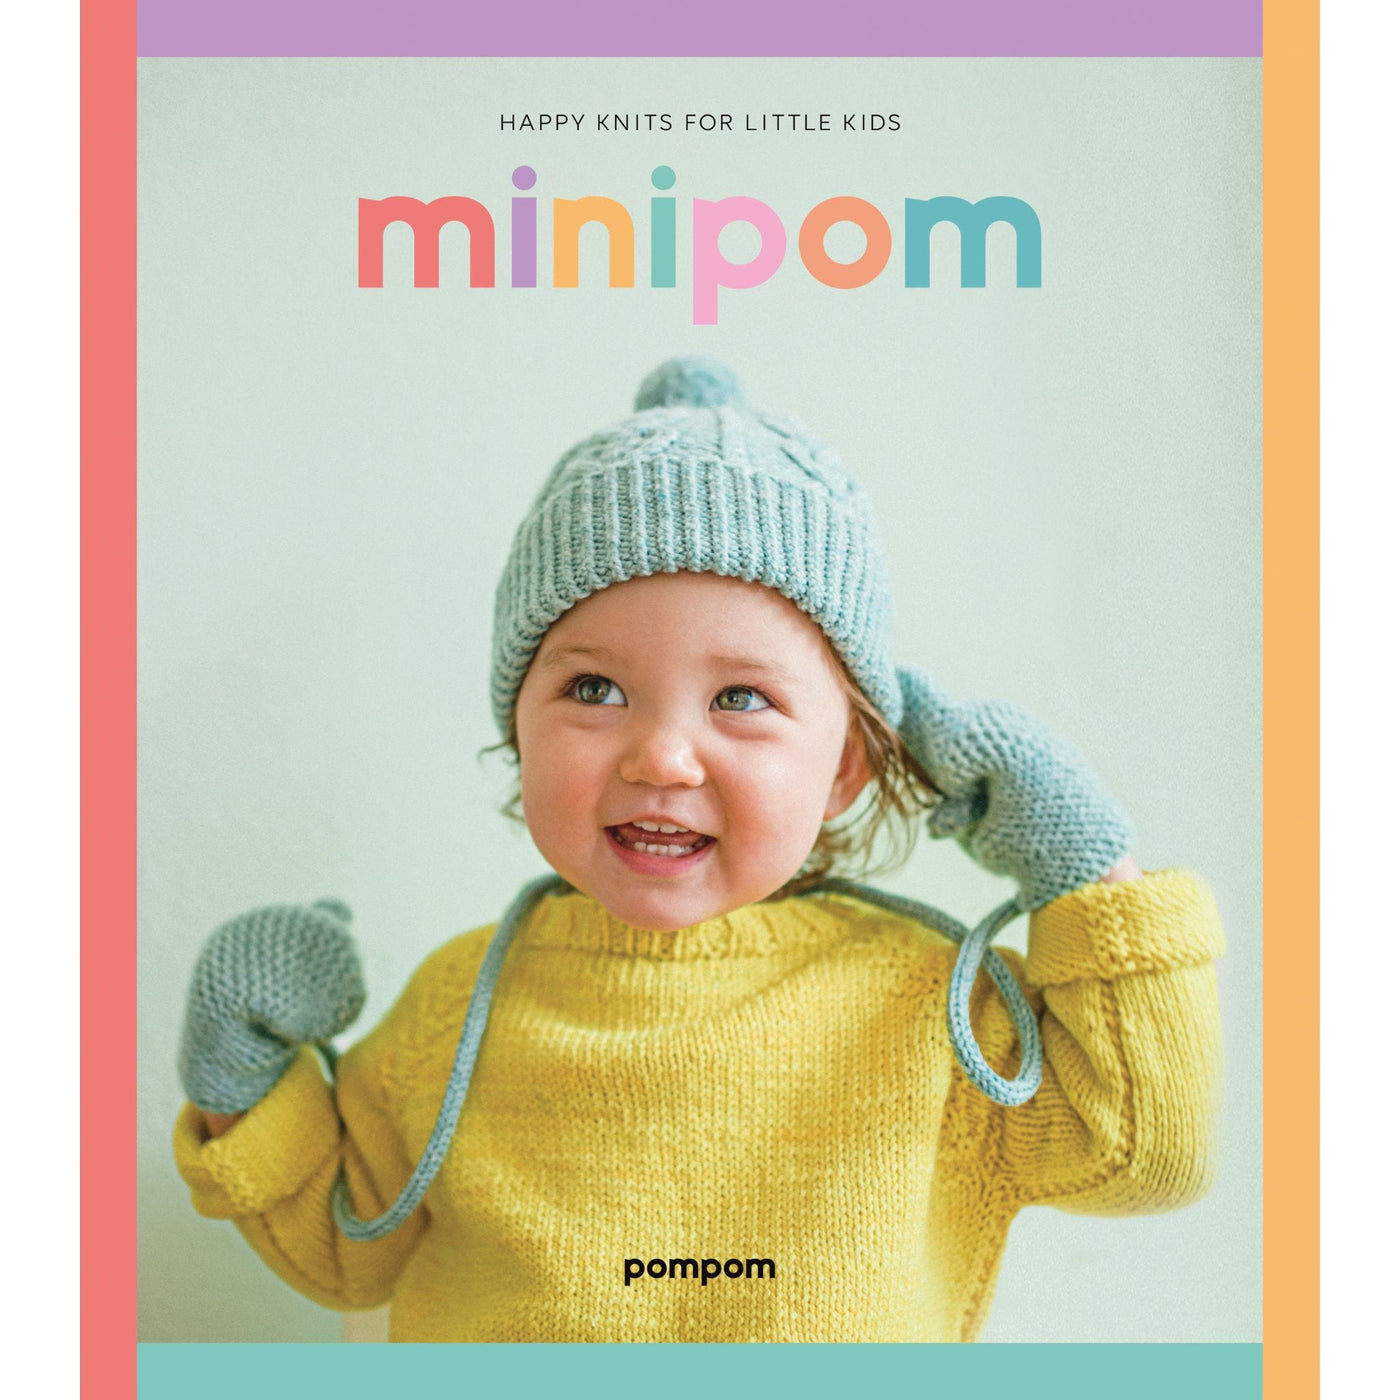 Covere of minipom magazine by pom pom shows small child in yellow handknit  sweater with mittens and hat.